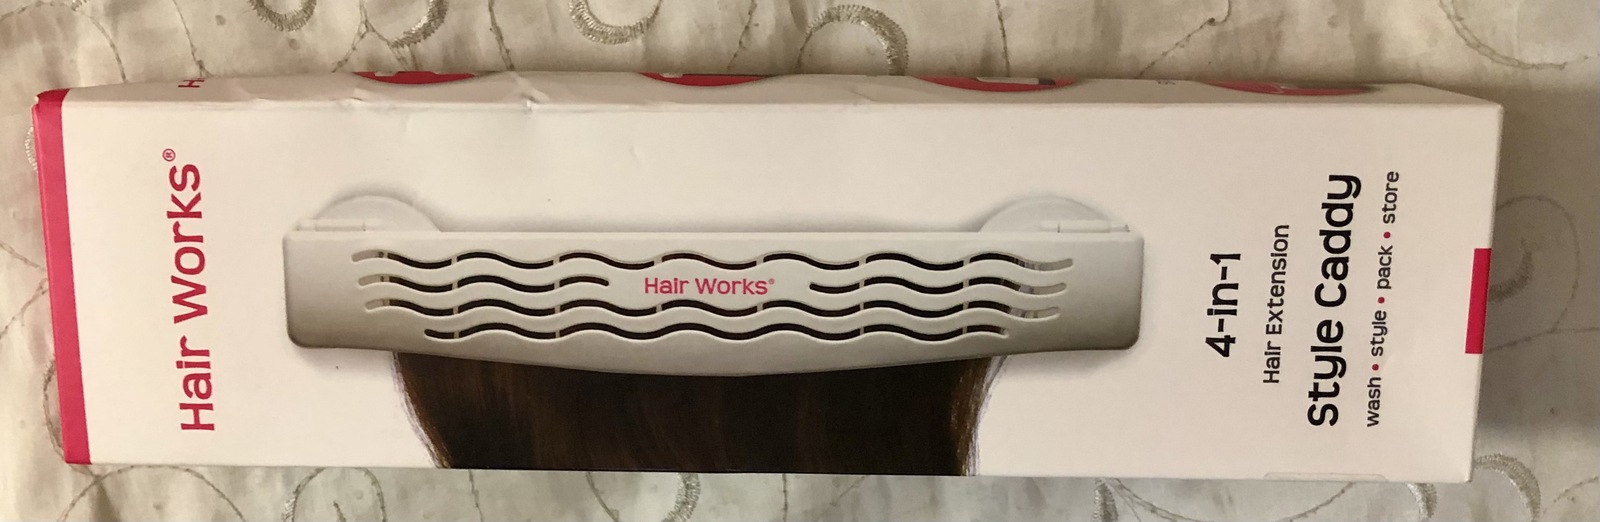 Hair Works 4-in-1 Hair Extension Style Caddy - The Original Extension Holder  - $26.95